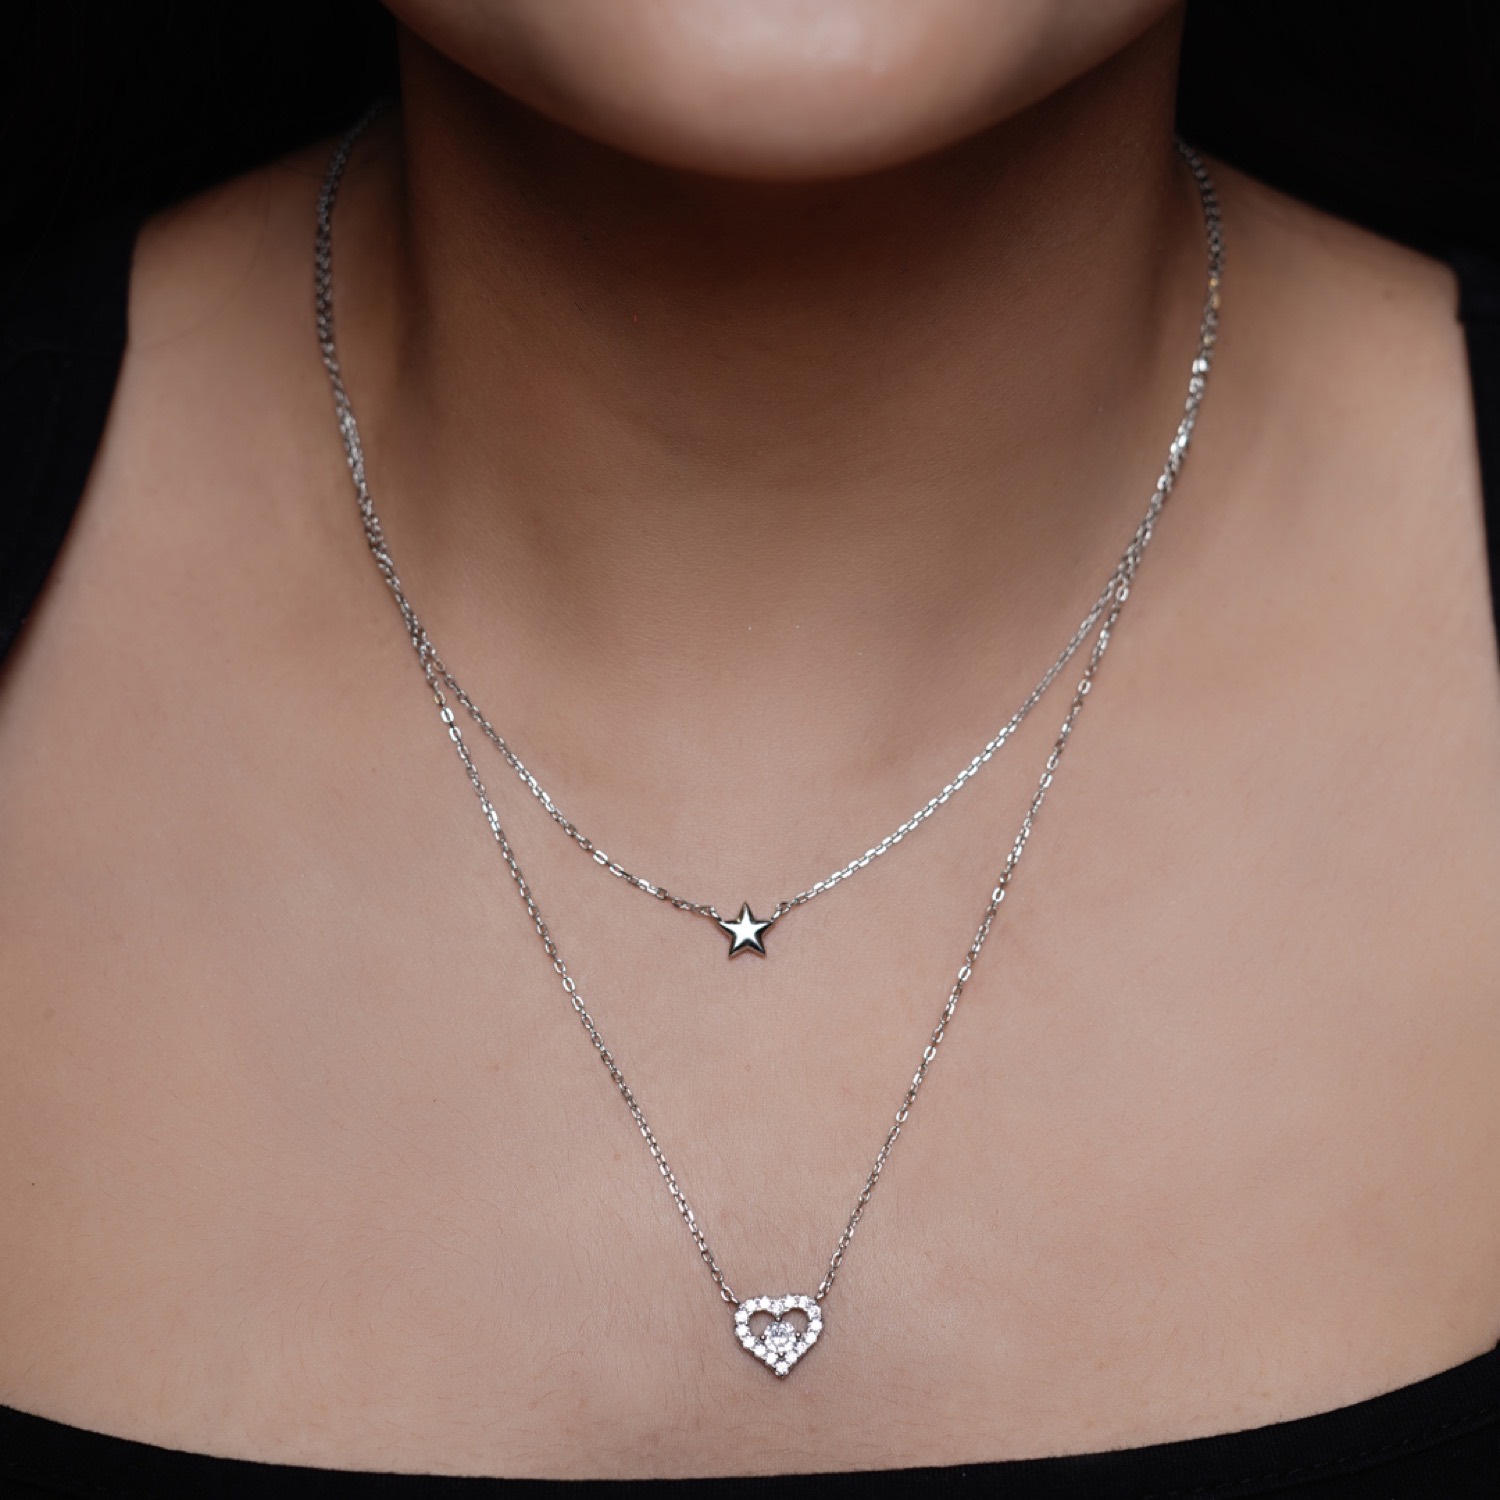 varam_chain_102022_double_layered_star_and_heart_pendant_thin_silver chain-2